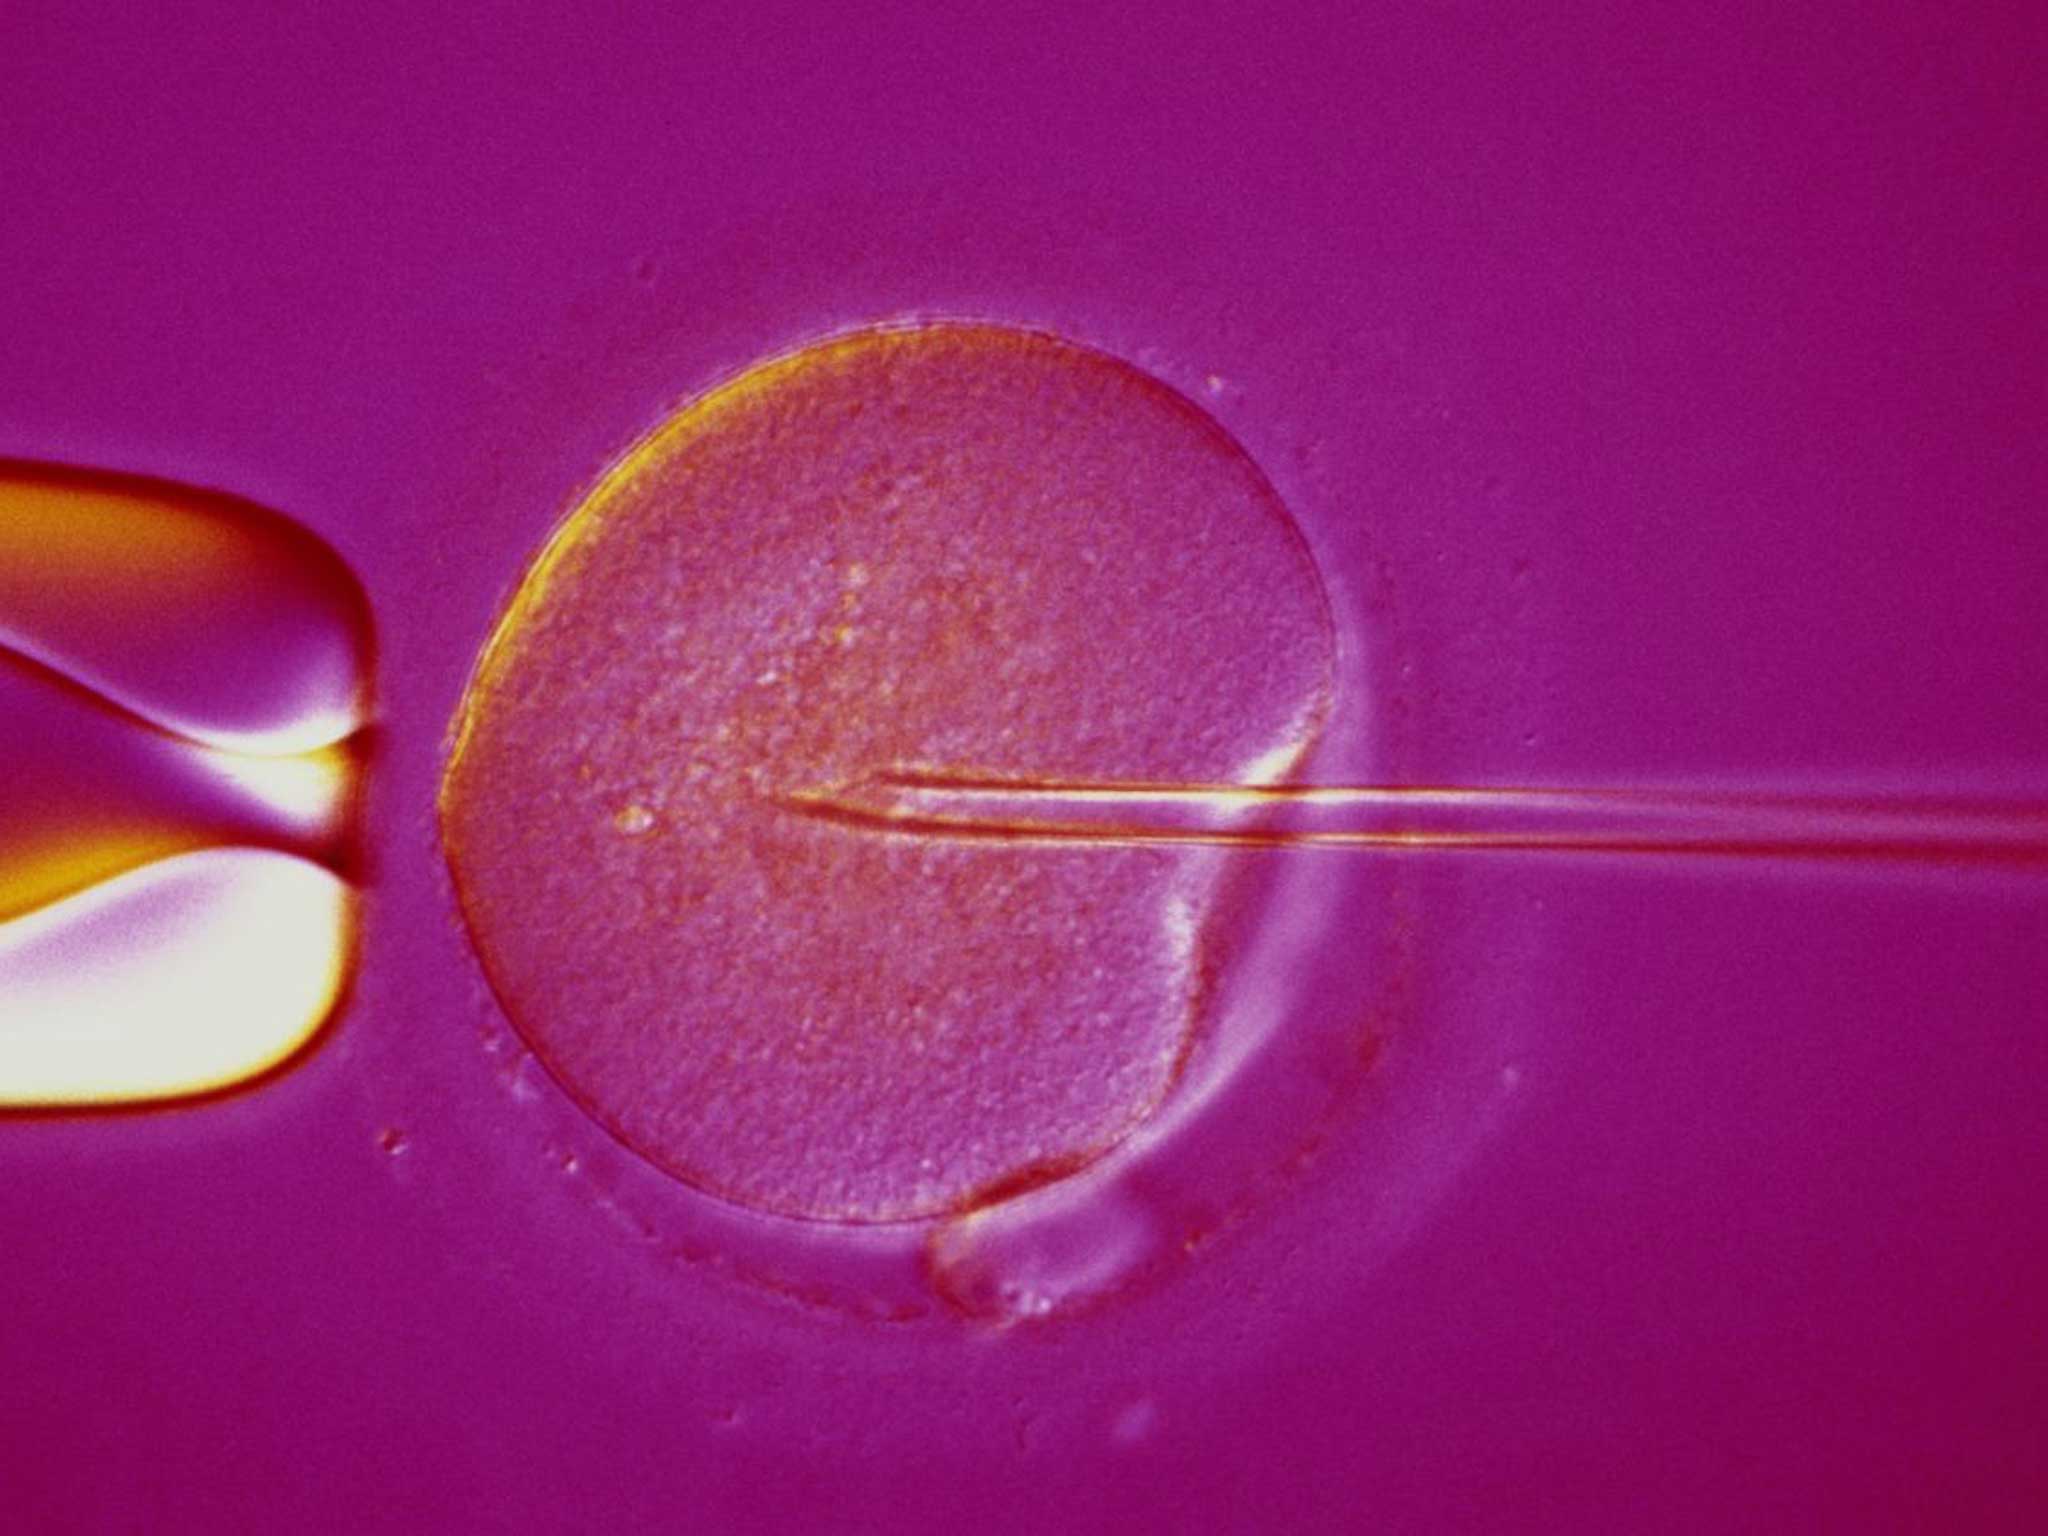 Intracytoplasmic sperm injection is used in about half the cases